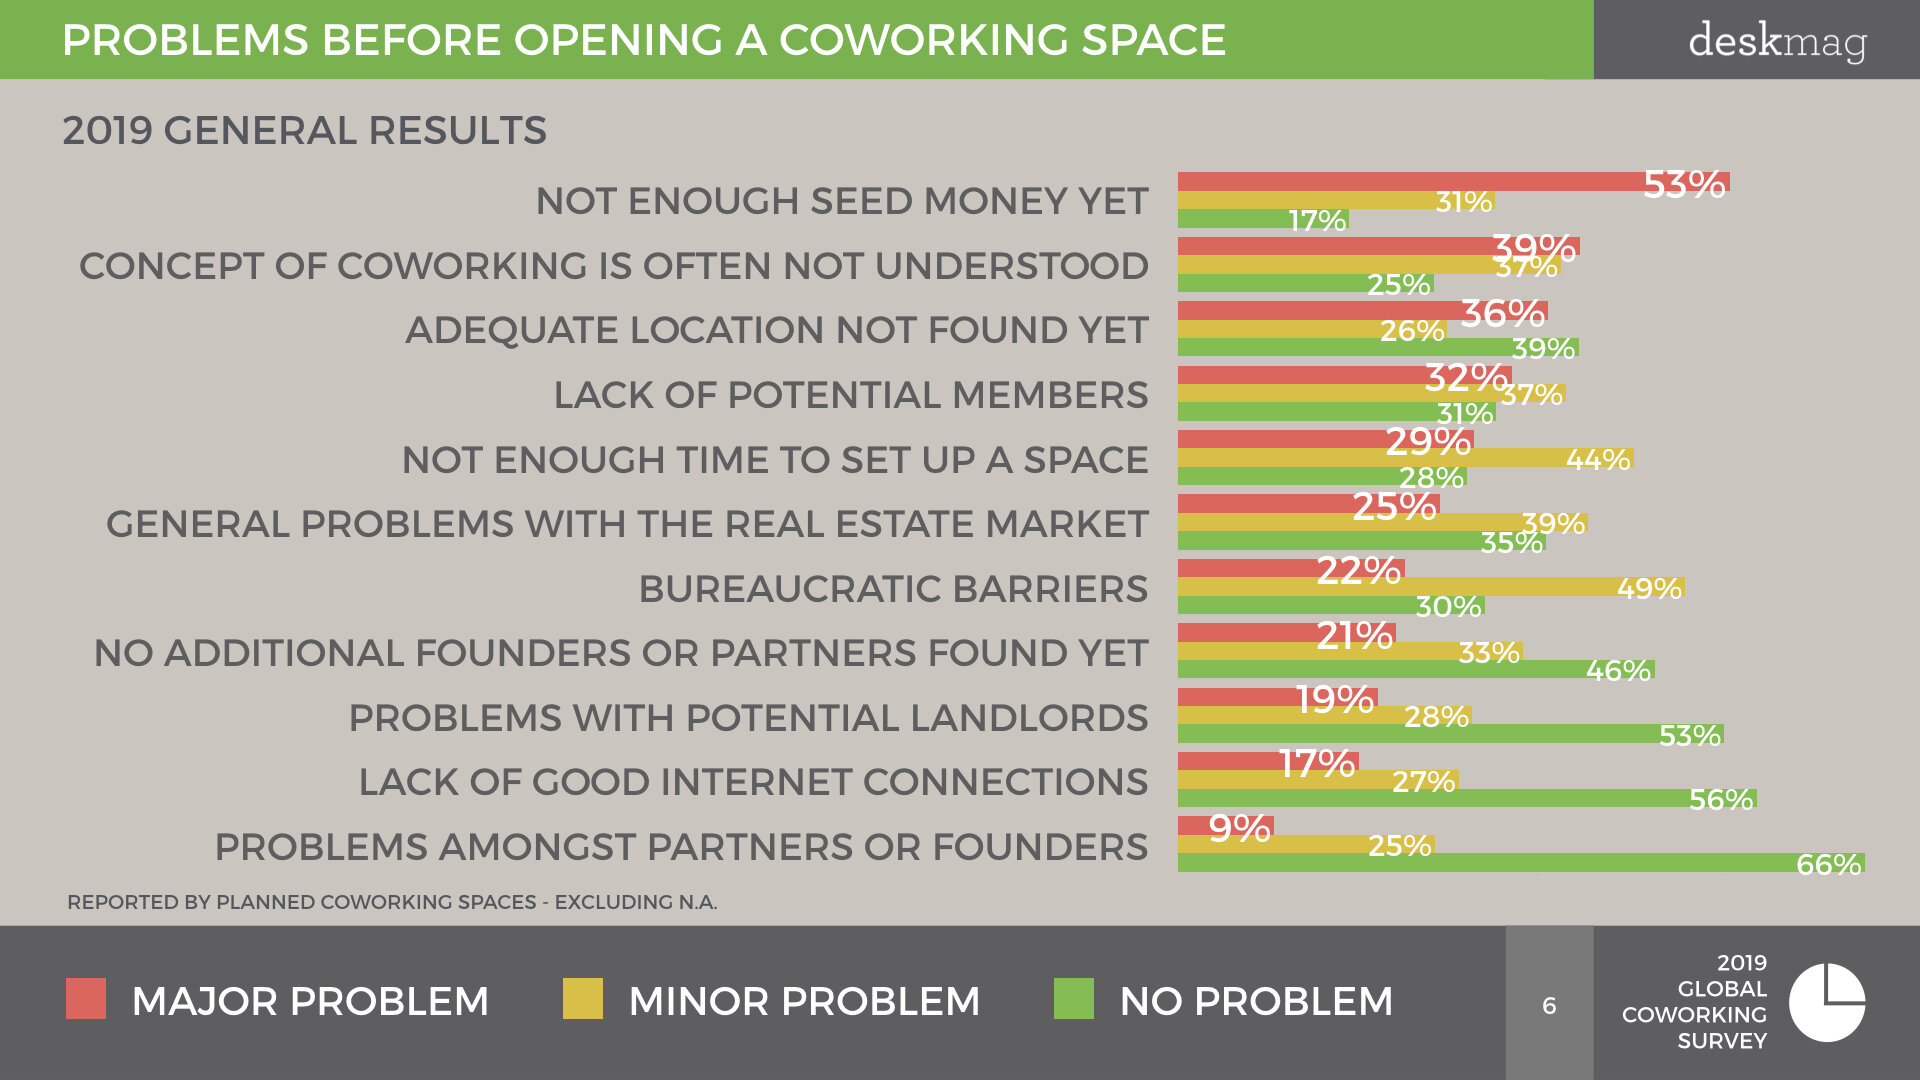 2019 GCS - OPENING COWORKING SPACES - FINAL.006.jpeg